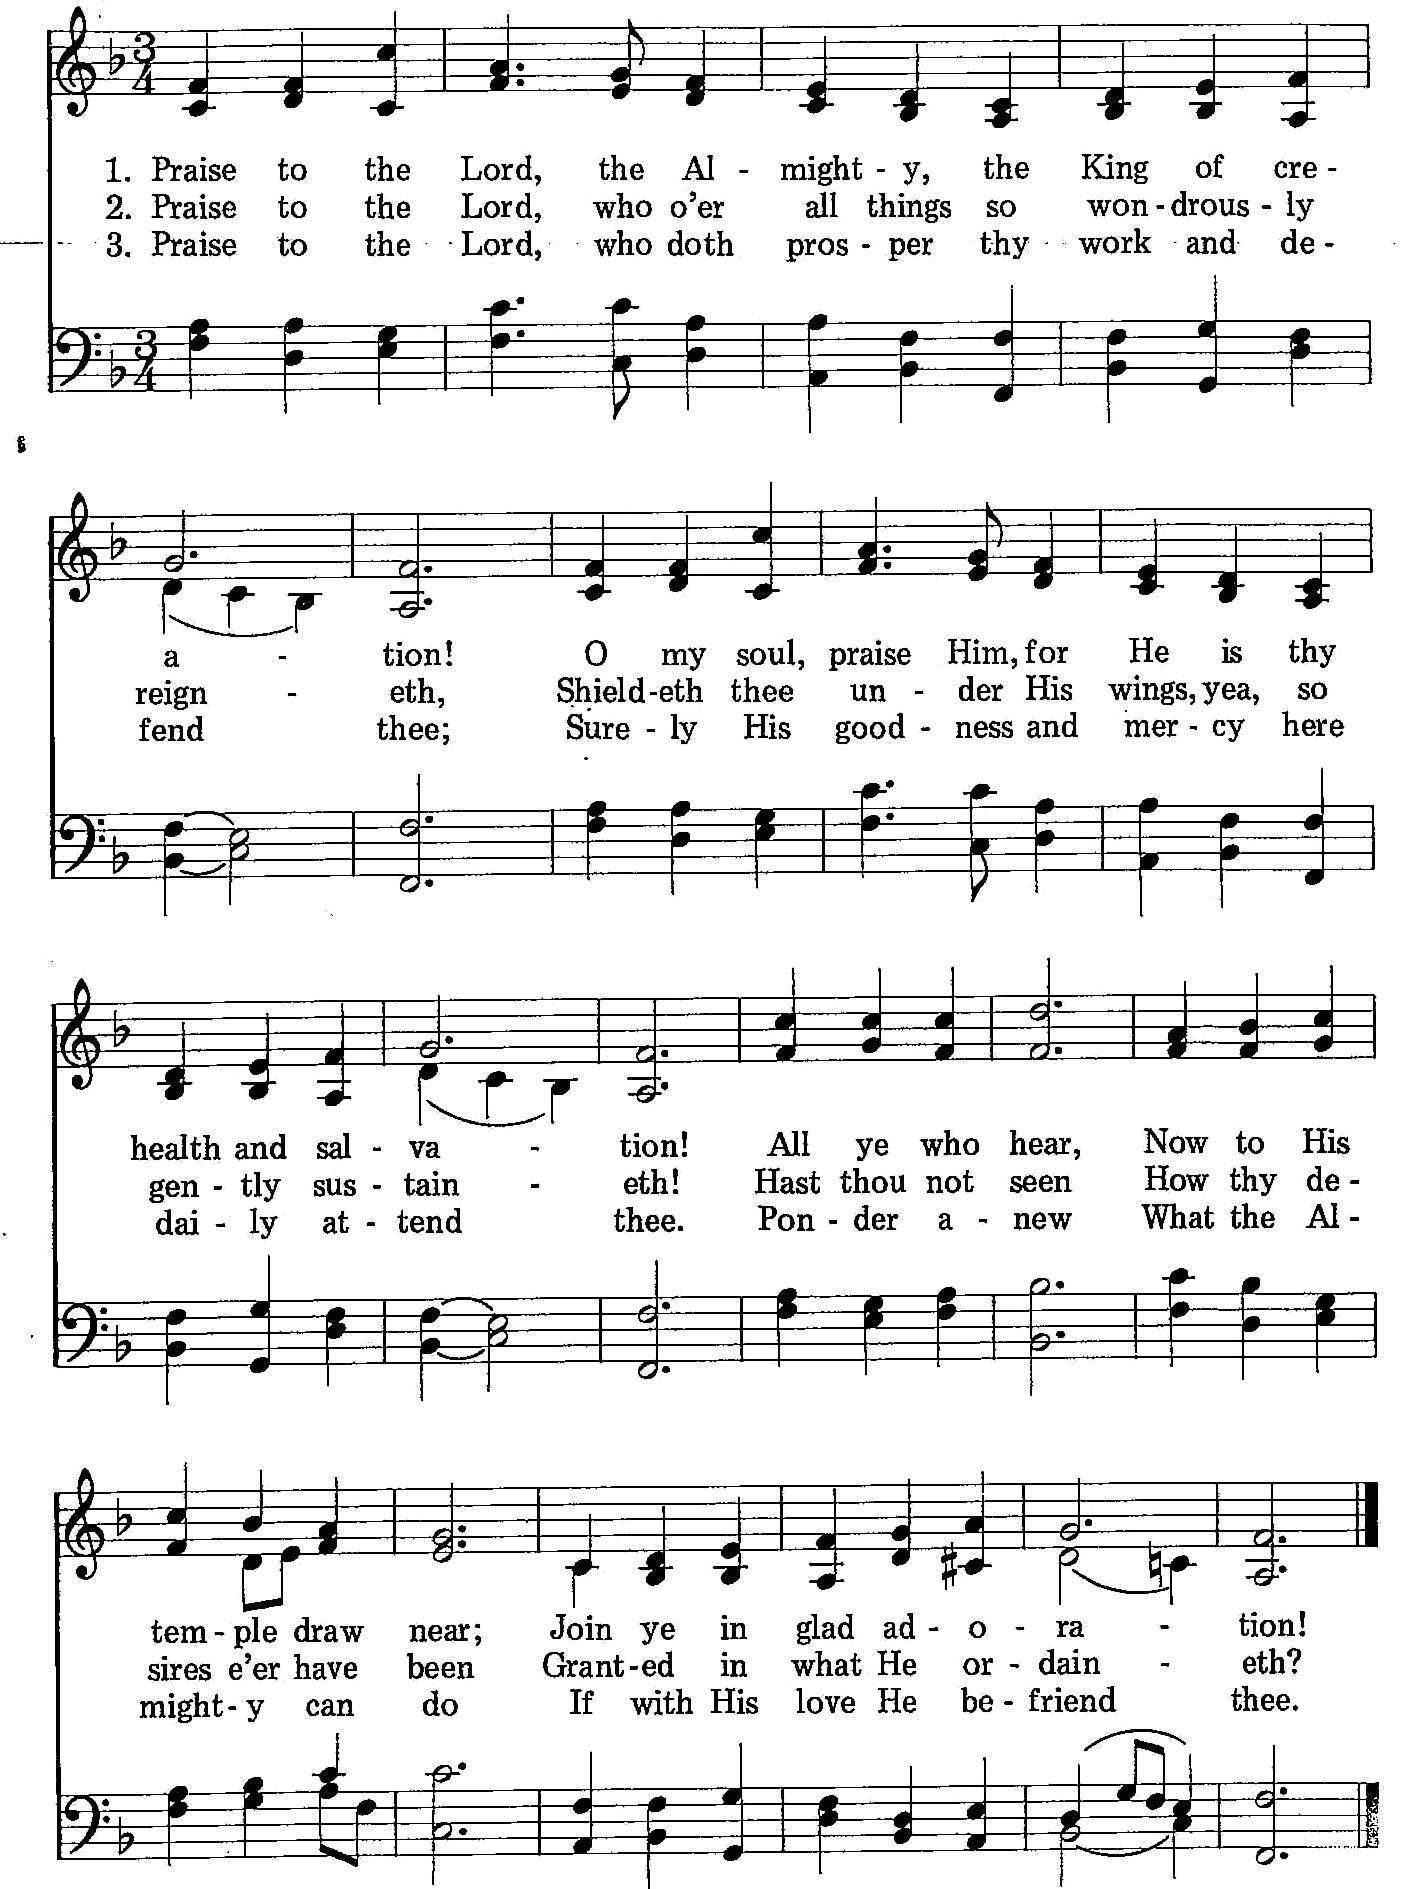 001 – Praise to the Lord sheet music